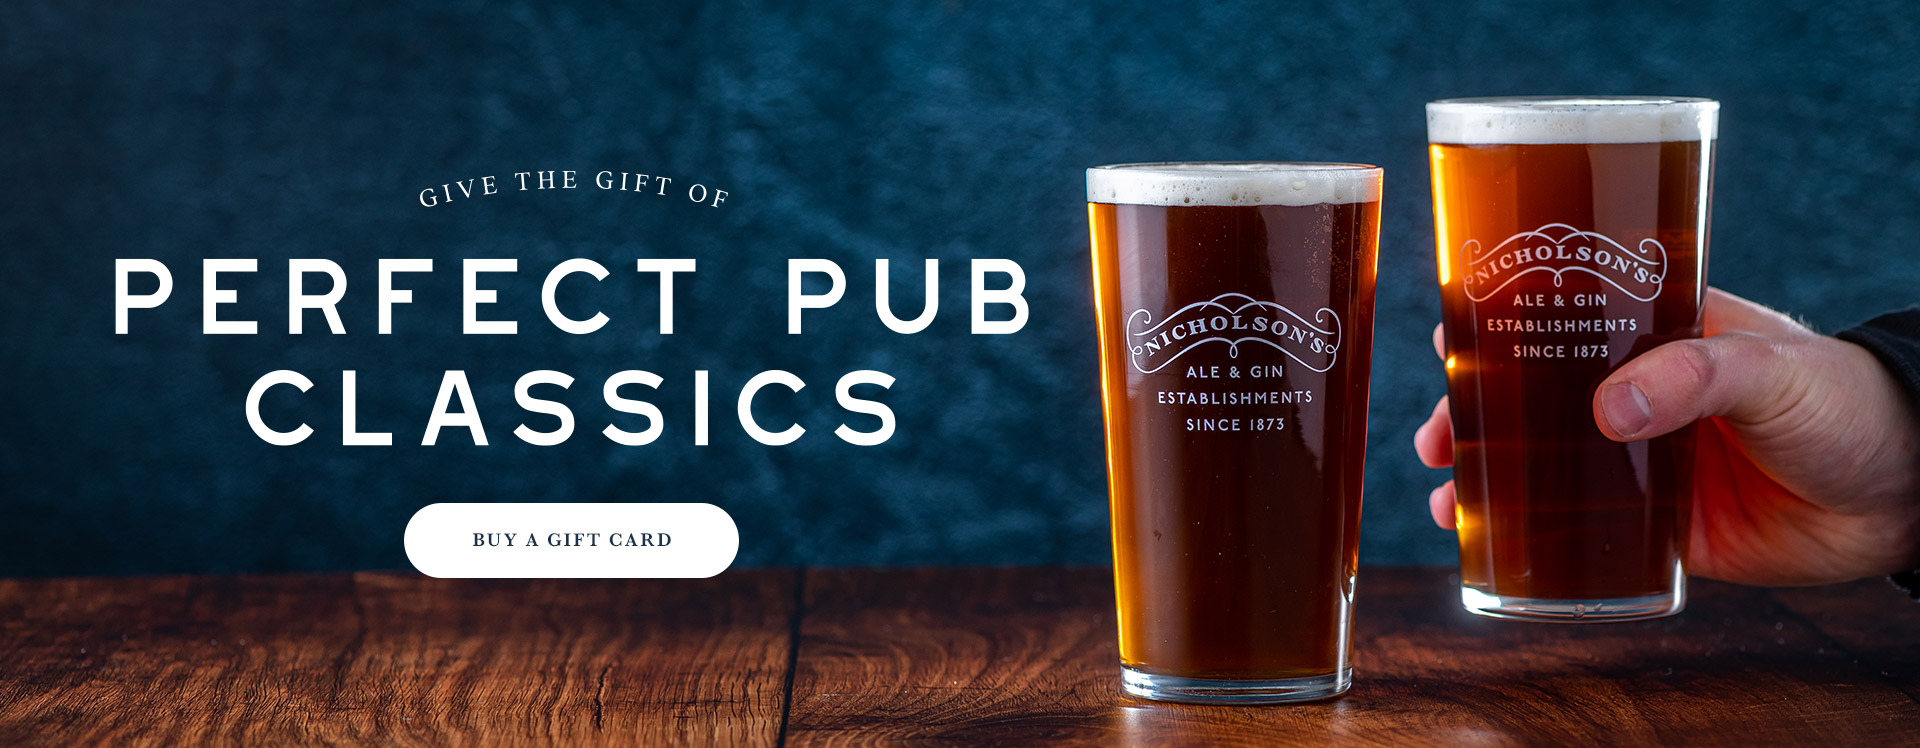 Nicholson’s Pub Gift Voucher at The Sawyer's Arms in Manchester